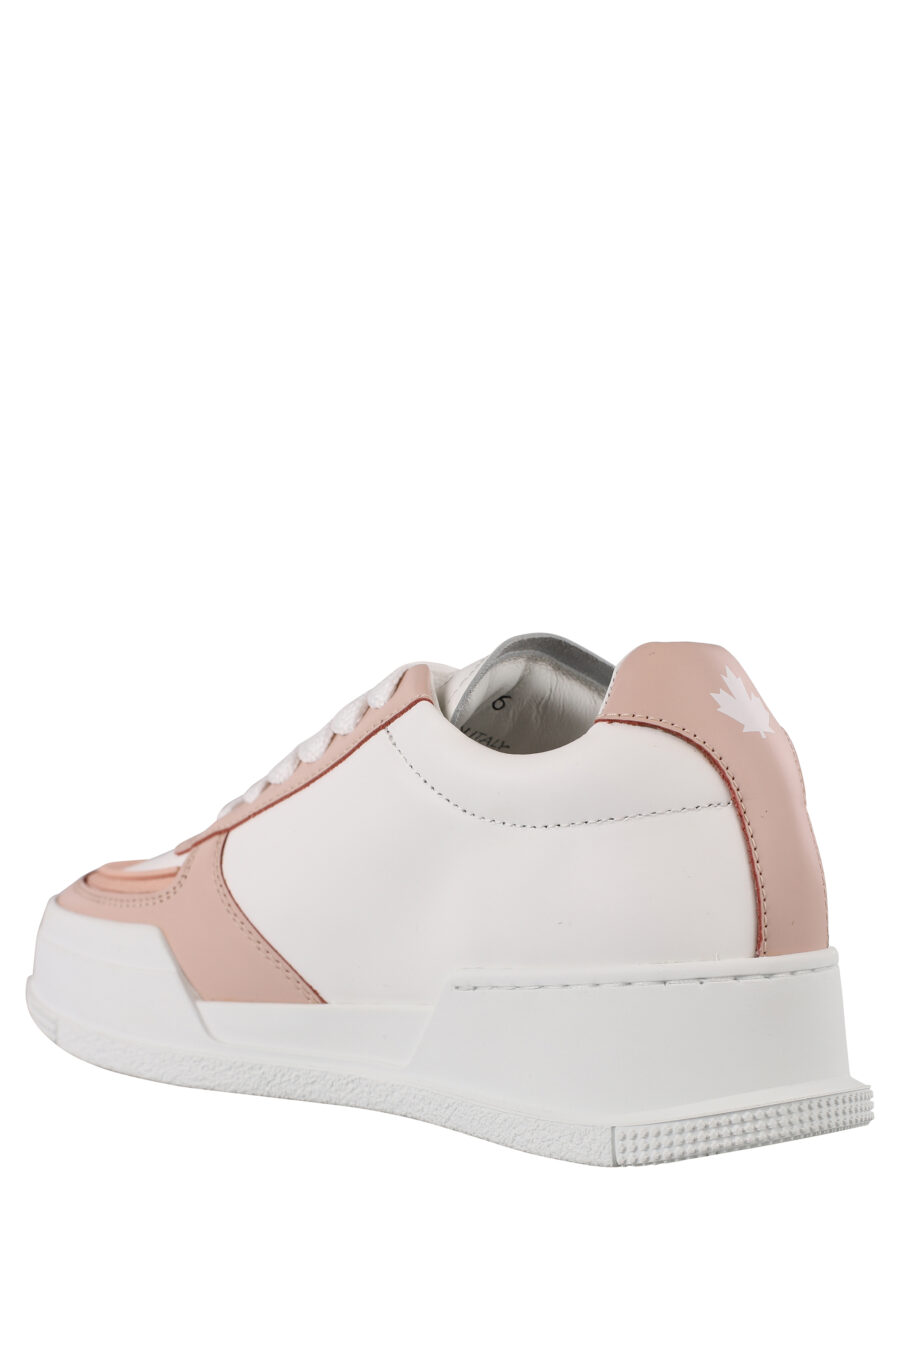 White platform trainers with pink detail - IMG 1176